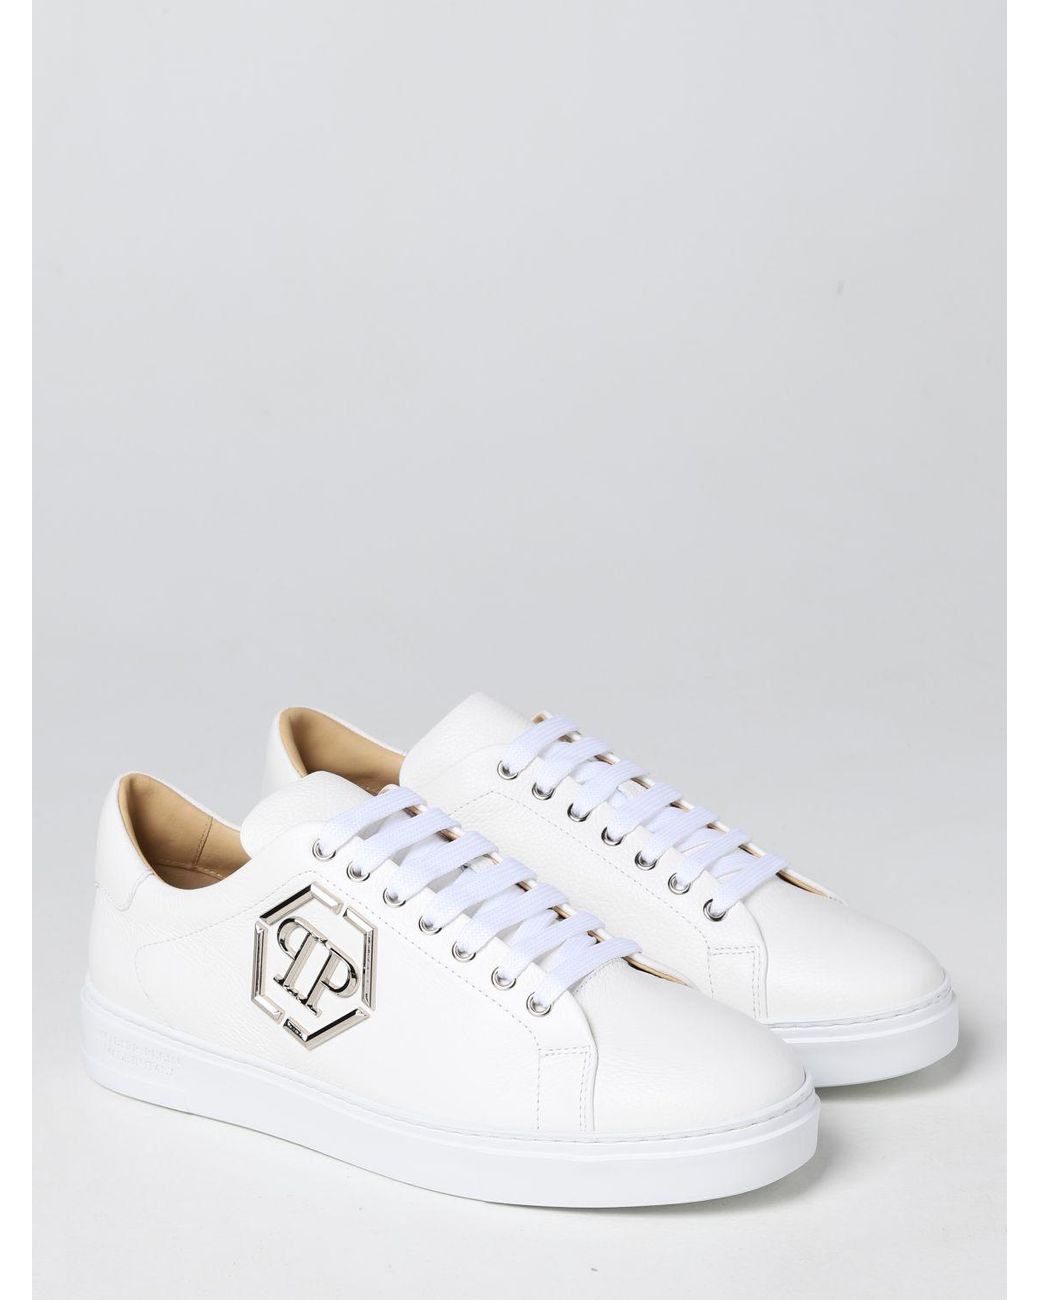 Plein Sneakers In Grained Leather in White for Men Lyst